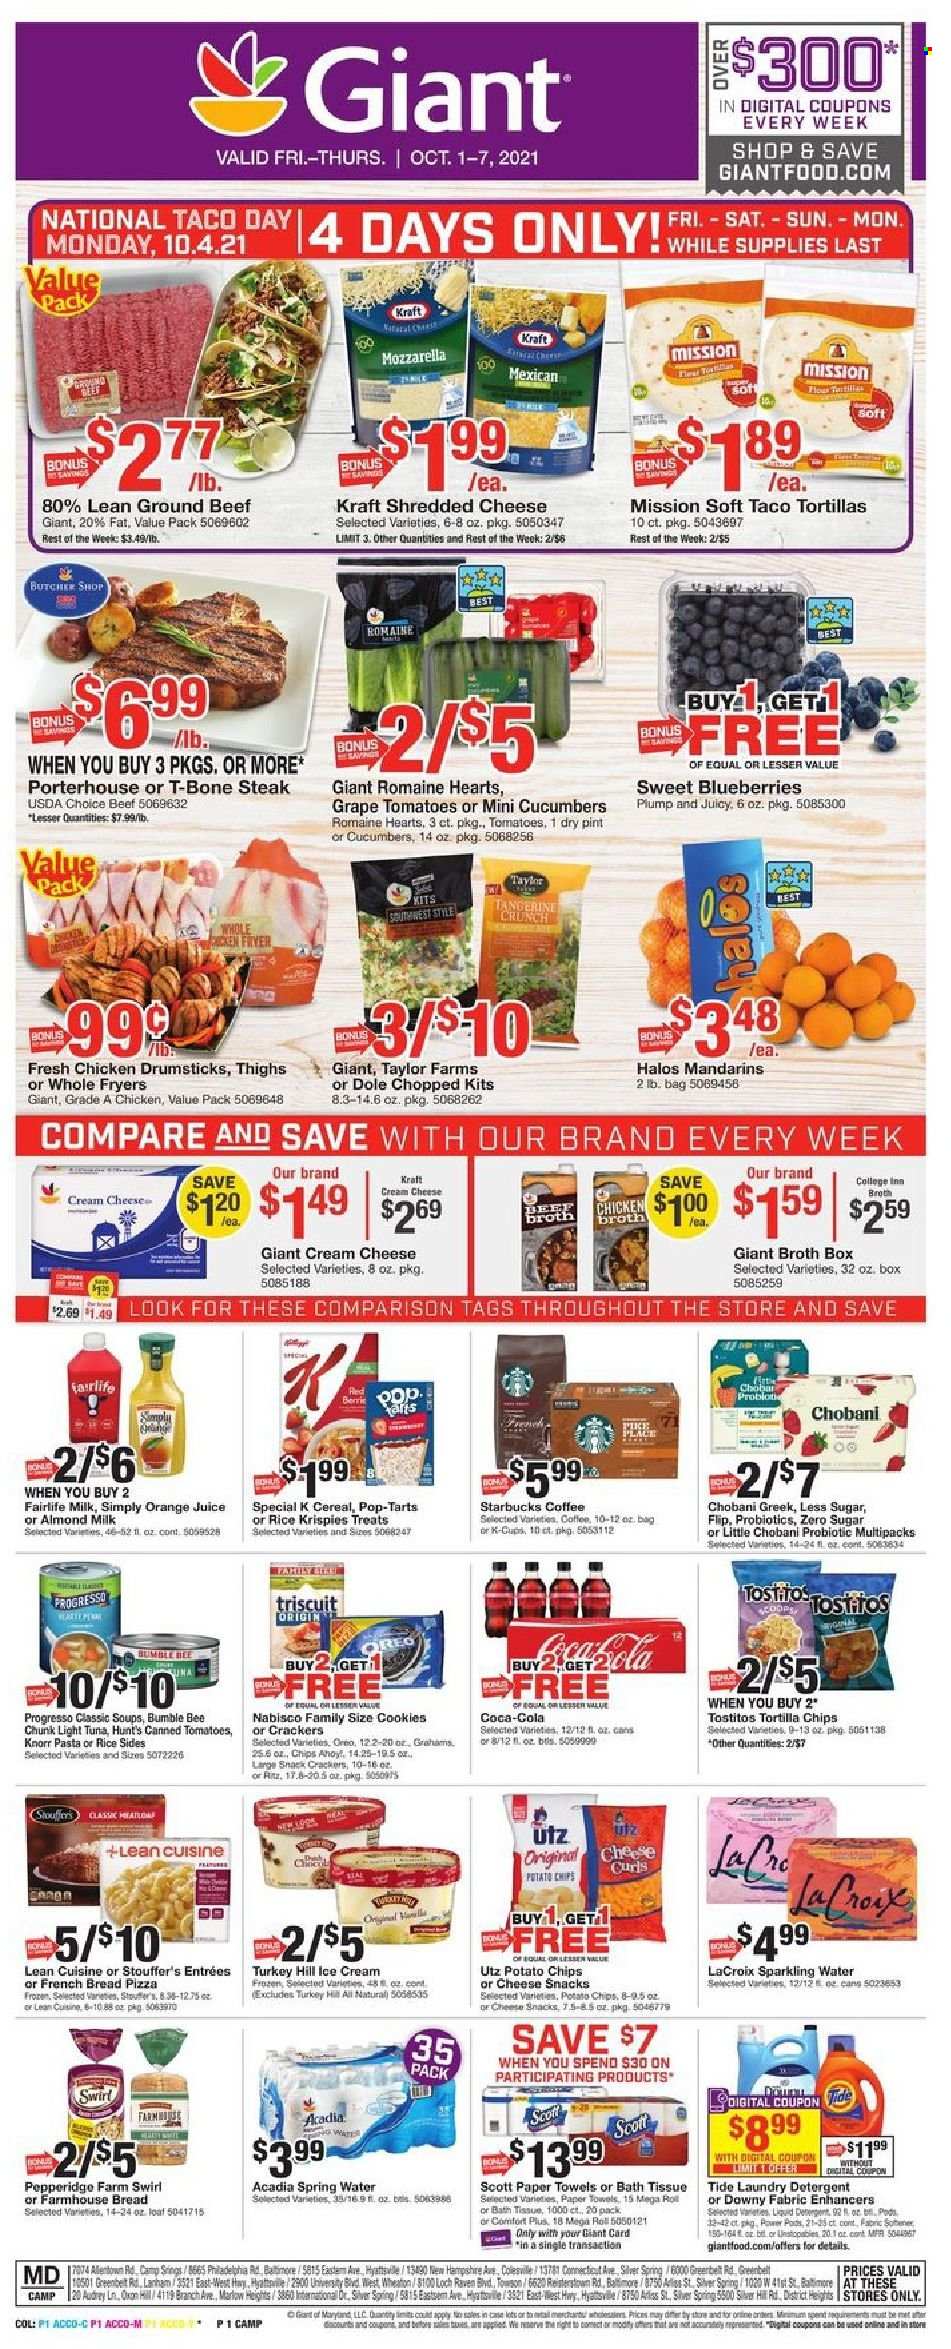 thumbnail - Giant Food Flyer - 10/01/2021 - 10/07/2021 - Sales products - bread, french bread, Dole, blueberries, mandarines, pizza, Bumble Bee, Knorr, Progresso, Lean Cuisine, Kraft®, cream cheese, shredded cheese, Oreo, Chobani, almond milk, Stouffer's, cookies, snack, crackers, Pop-Tarts, RITZ, tortilla chips, potato chips, Tostitos, beef broth, chicken broth, broth, light tuna, cereals, Rice Krispies, Coca-Cola, orange juice, juice, spring water, sparkling water, Acadia, coffee, Starbucks, coffee capsules, K-Cups, chicken drumsticks, beef meat, ground beef, t-bone steak, steak, bath tissue, Scott, kitchen towels, paper towels, detergent, Tide, laundry detergent, Downy Laundry, probiotics. Page 1.